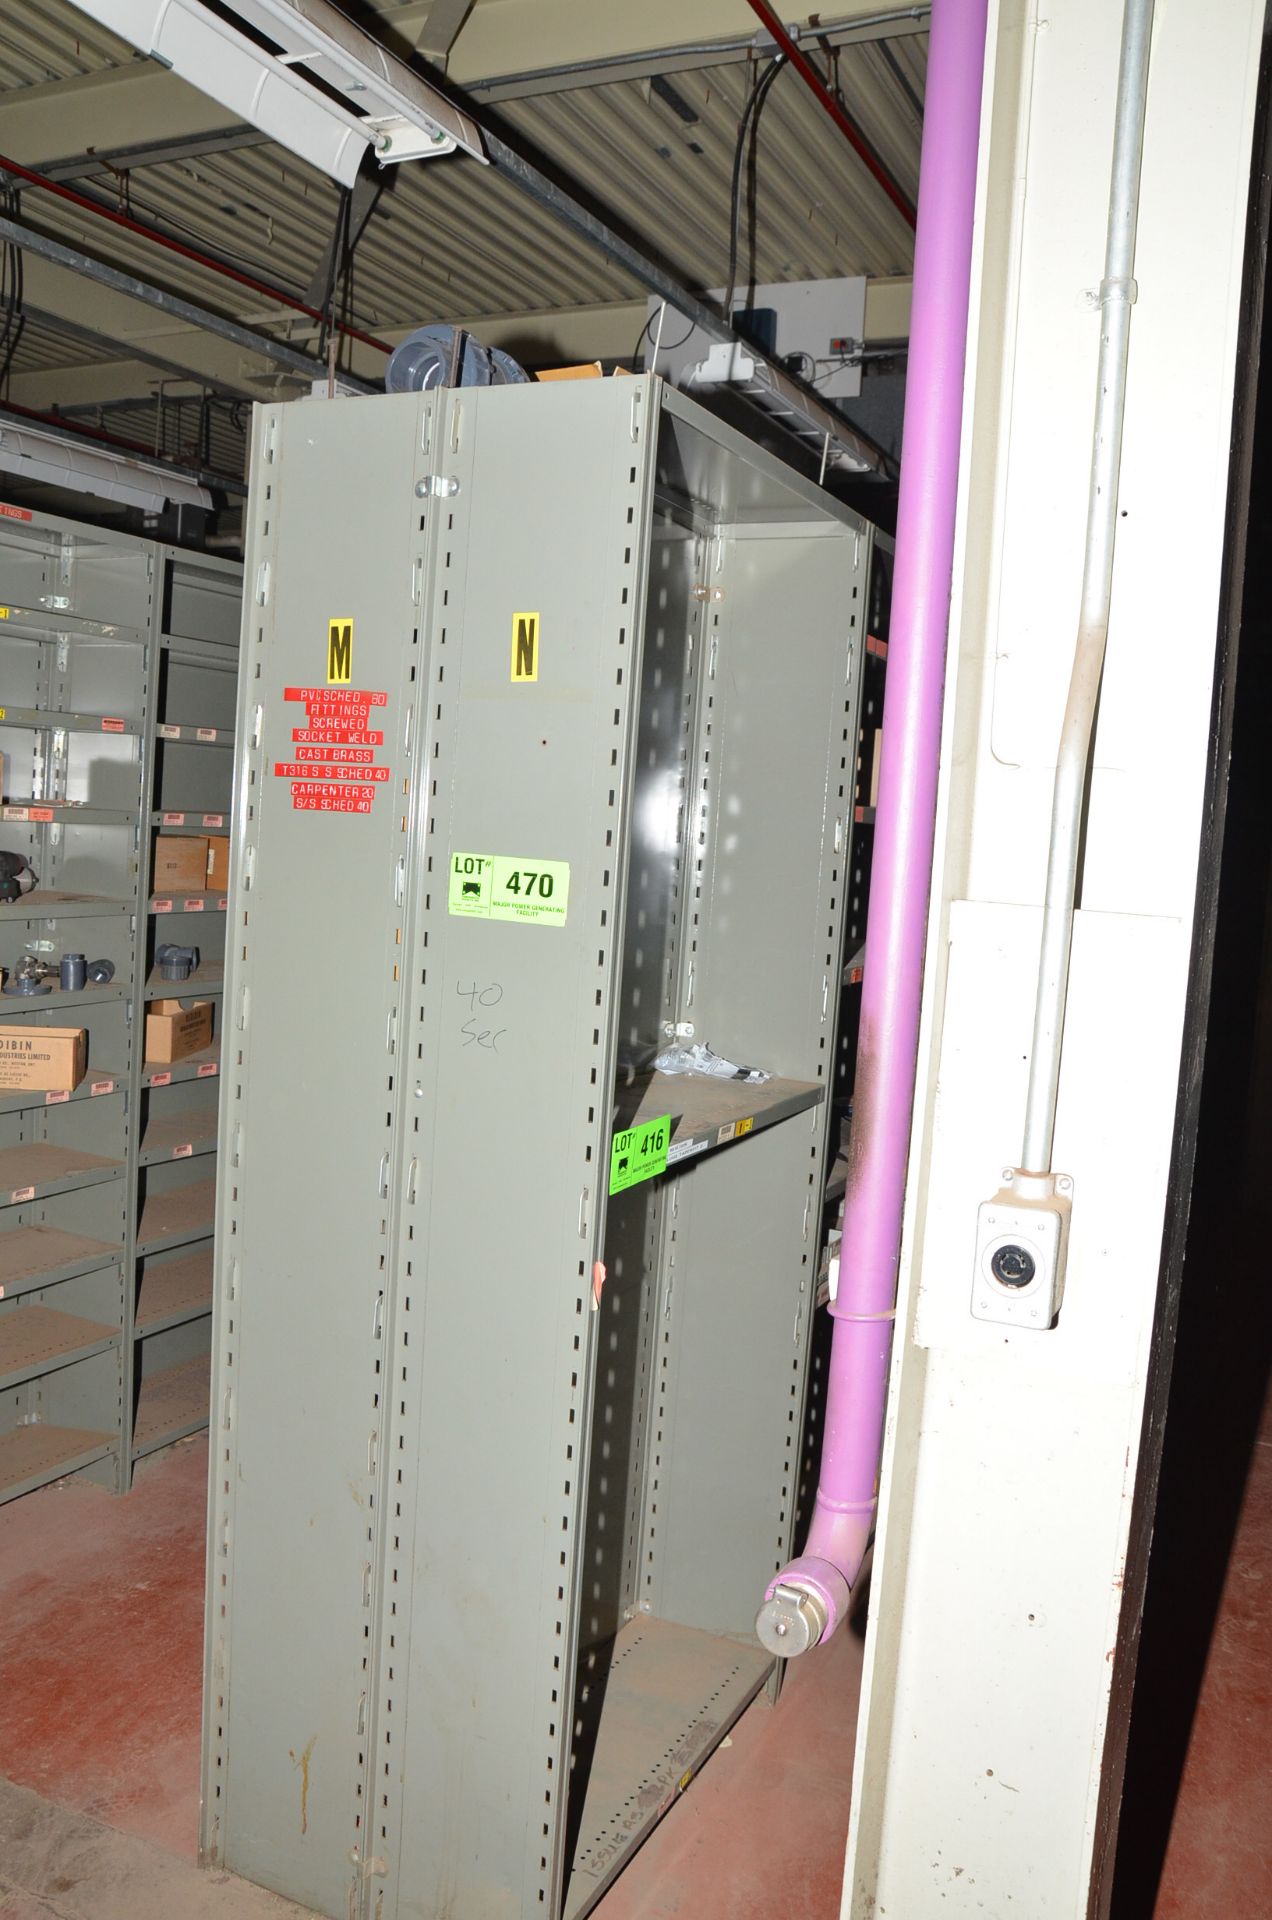 LOT/ (40) SECTIONS METAL SHELVING - NO CONTENTS - DELAY DELIVERY [RIGGING FEE FOR LOT #470 - $TBD